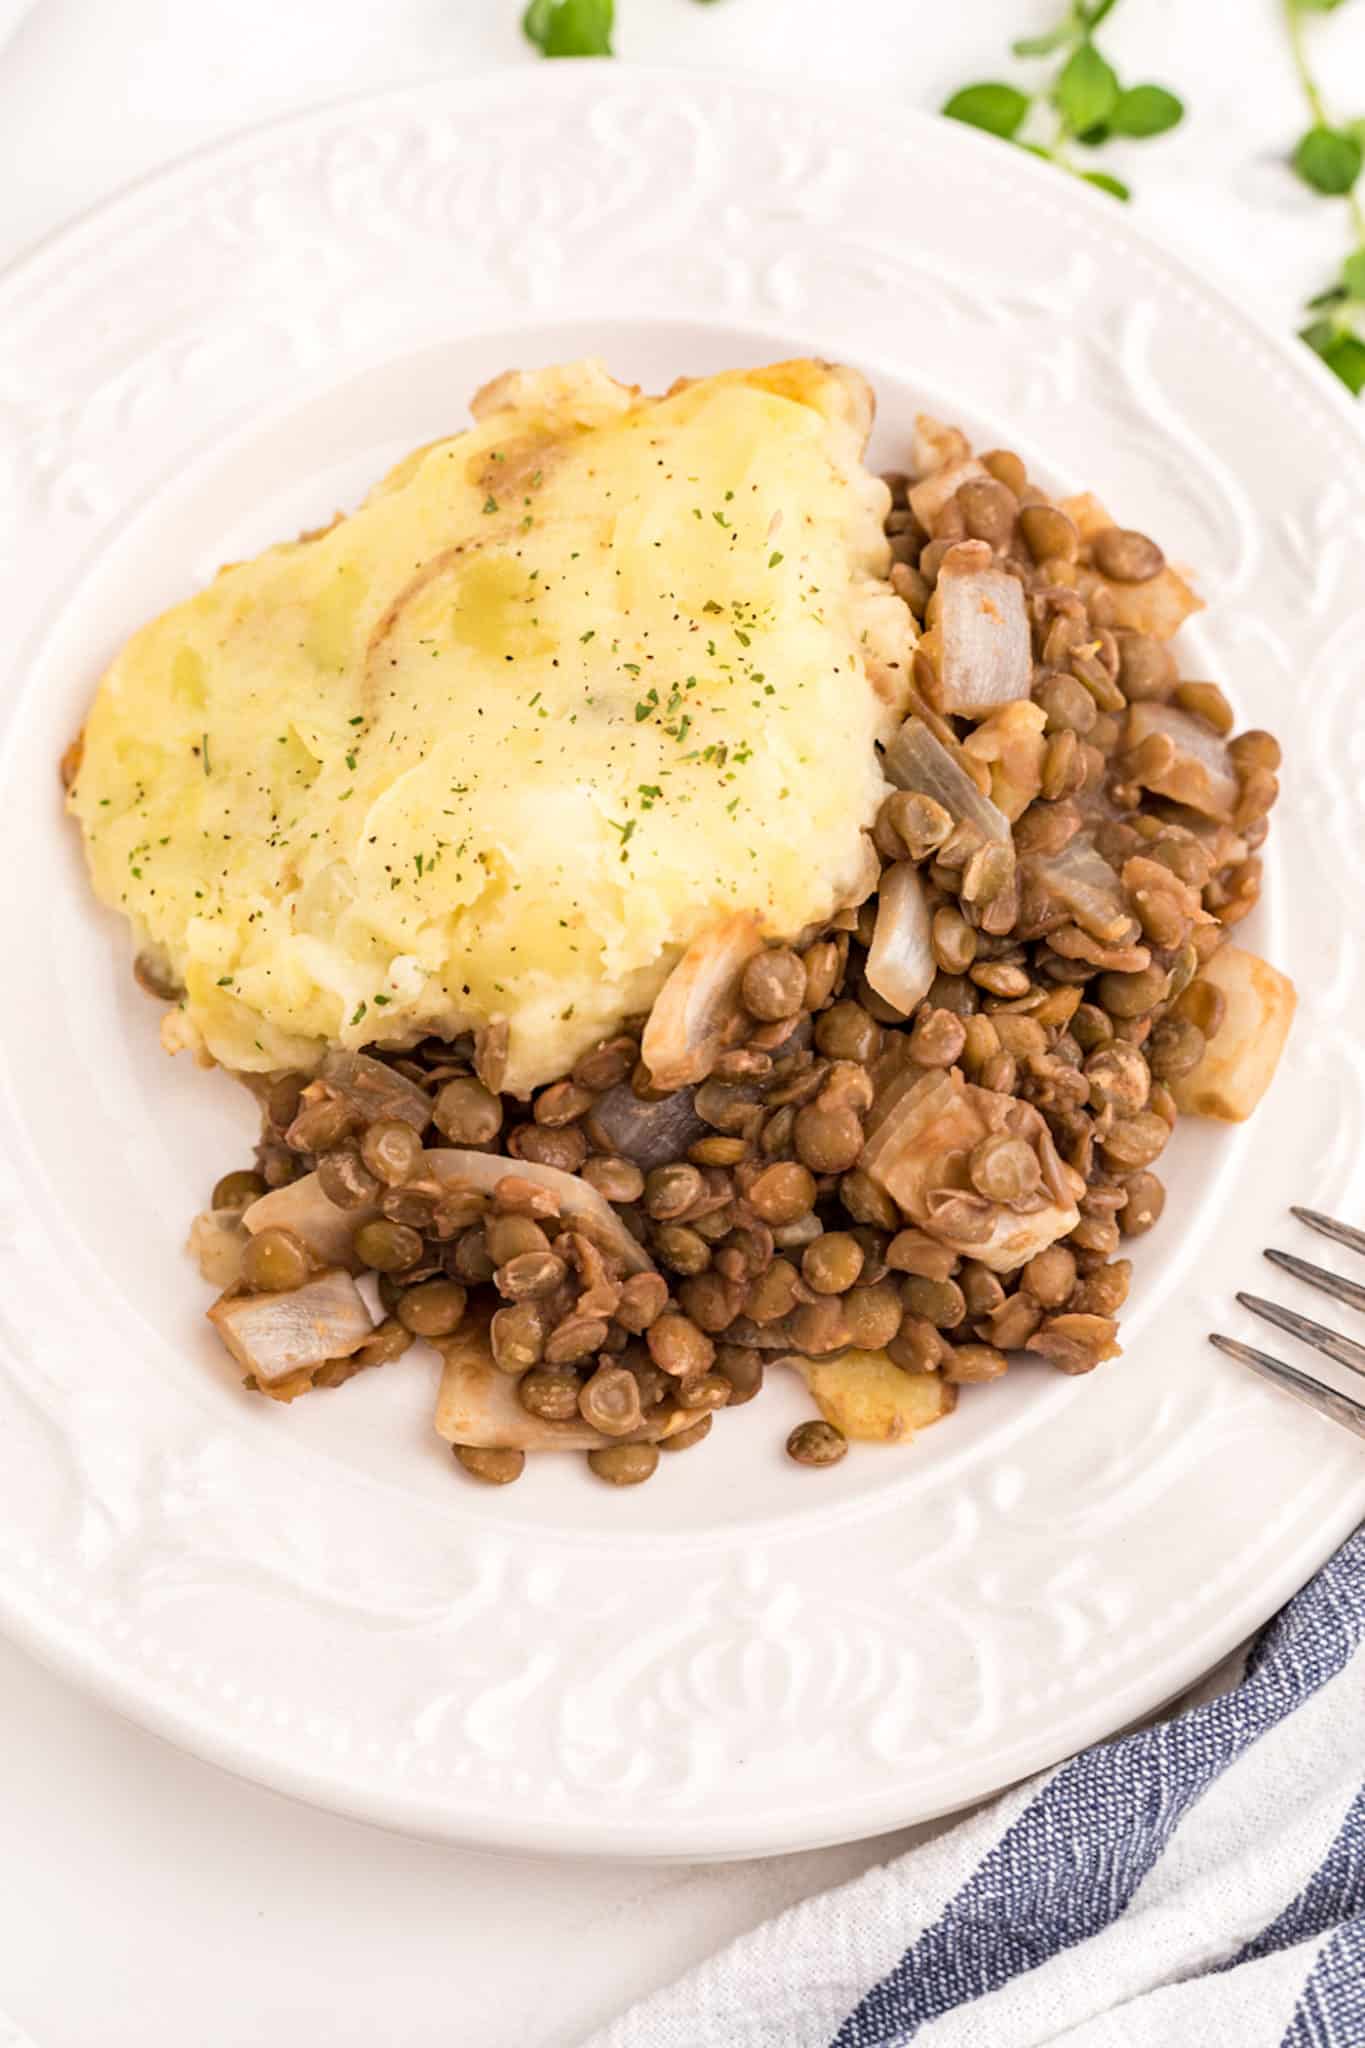 mashed potatoes with lentils on a plate.